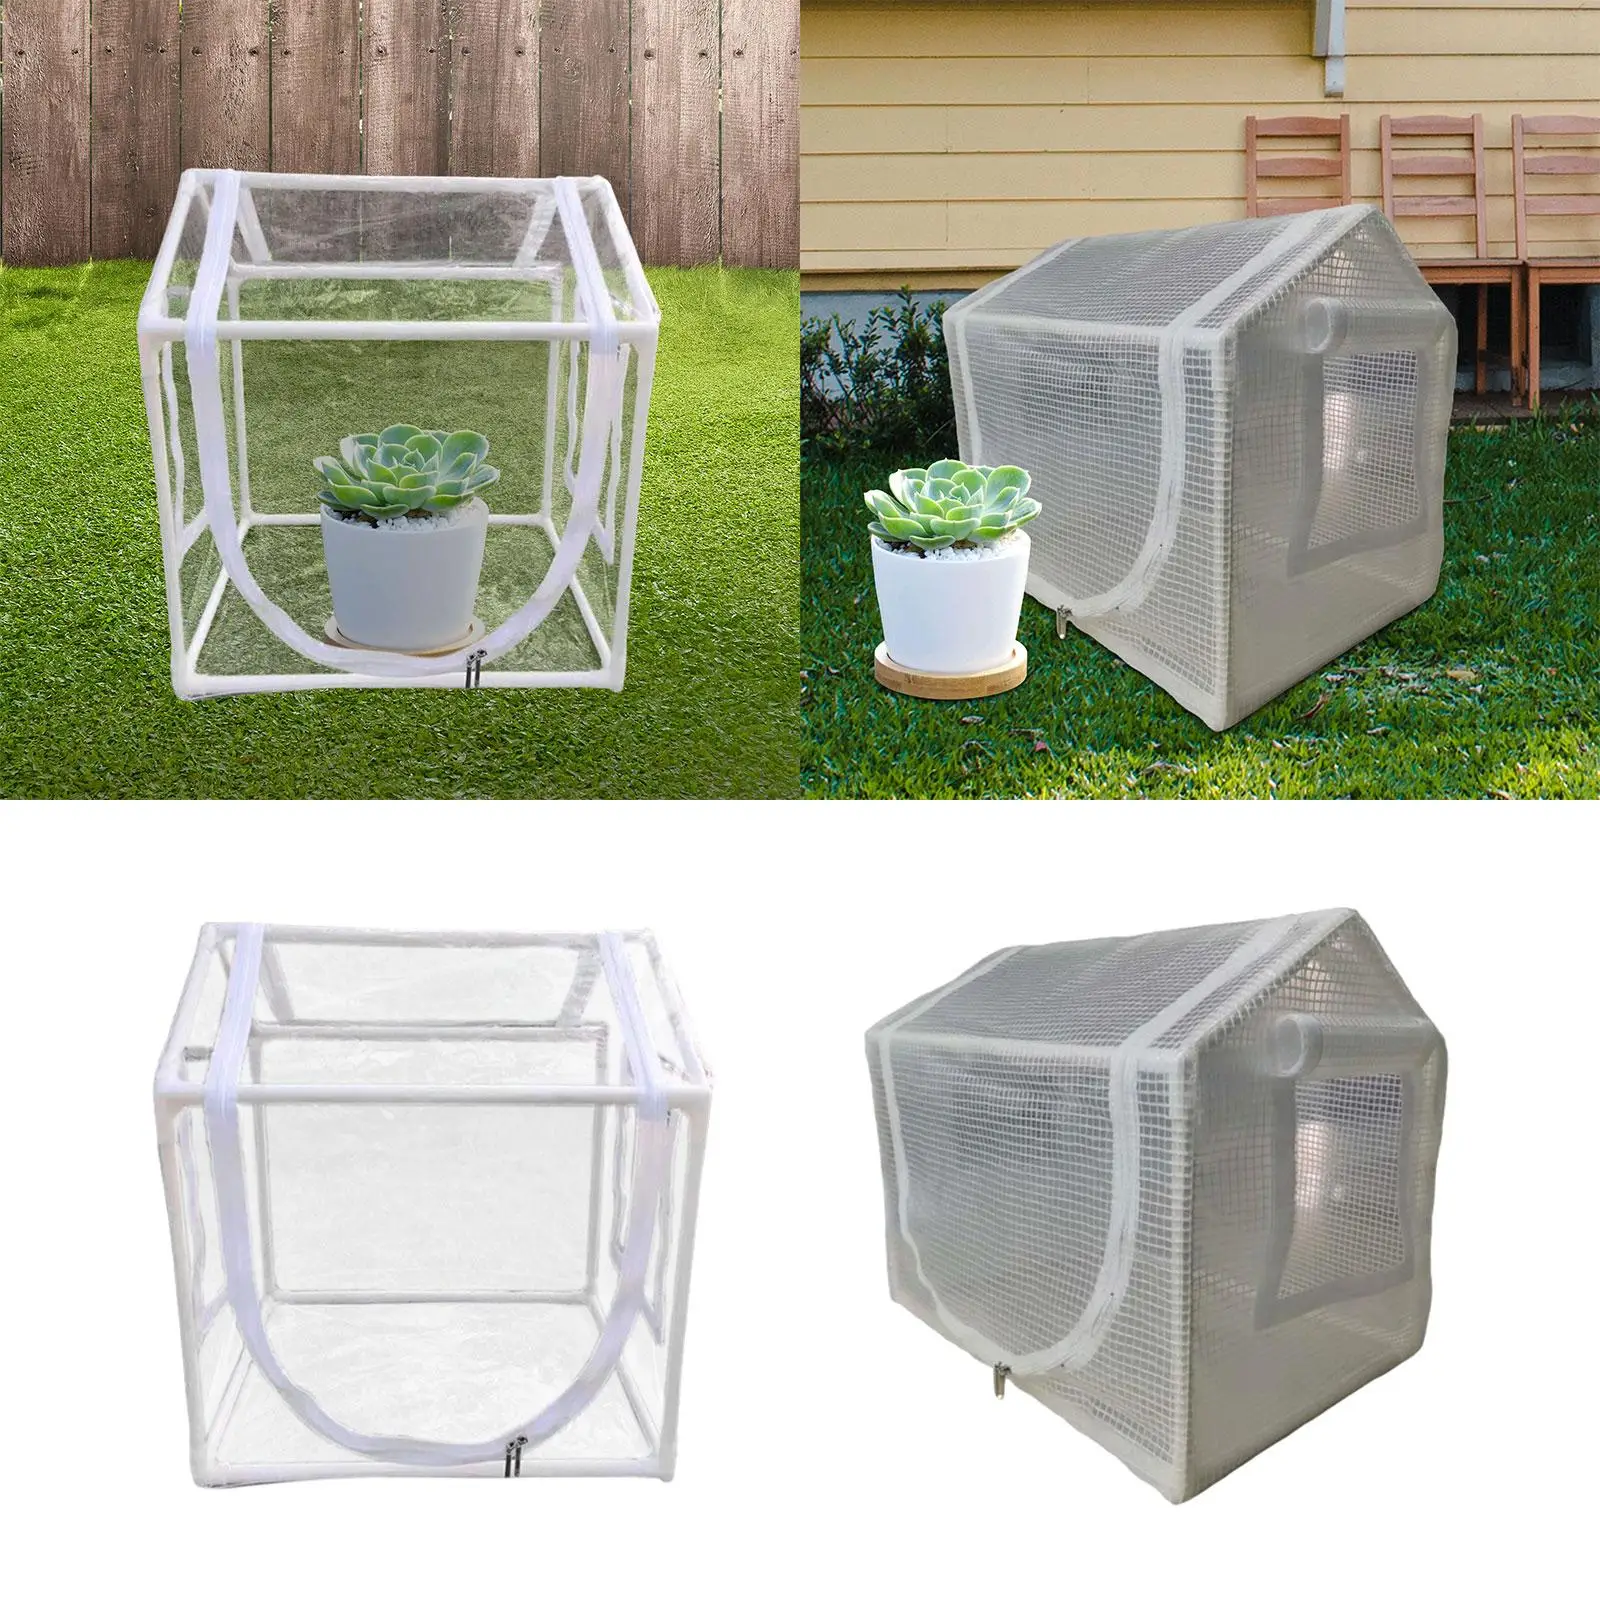 Still Air Box Mushrooms Growing Tent Yard Durable for Cold Frost Protector Garden Reusable PVC Indoor Outdoor Mini Greenhouse